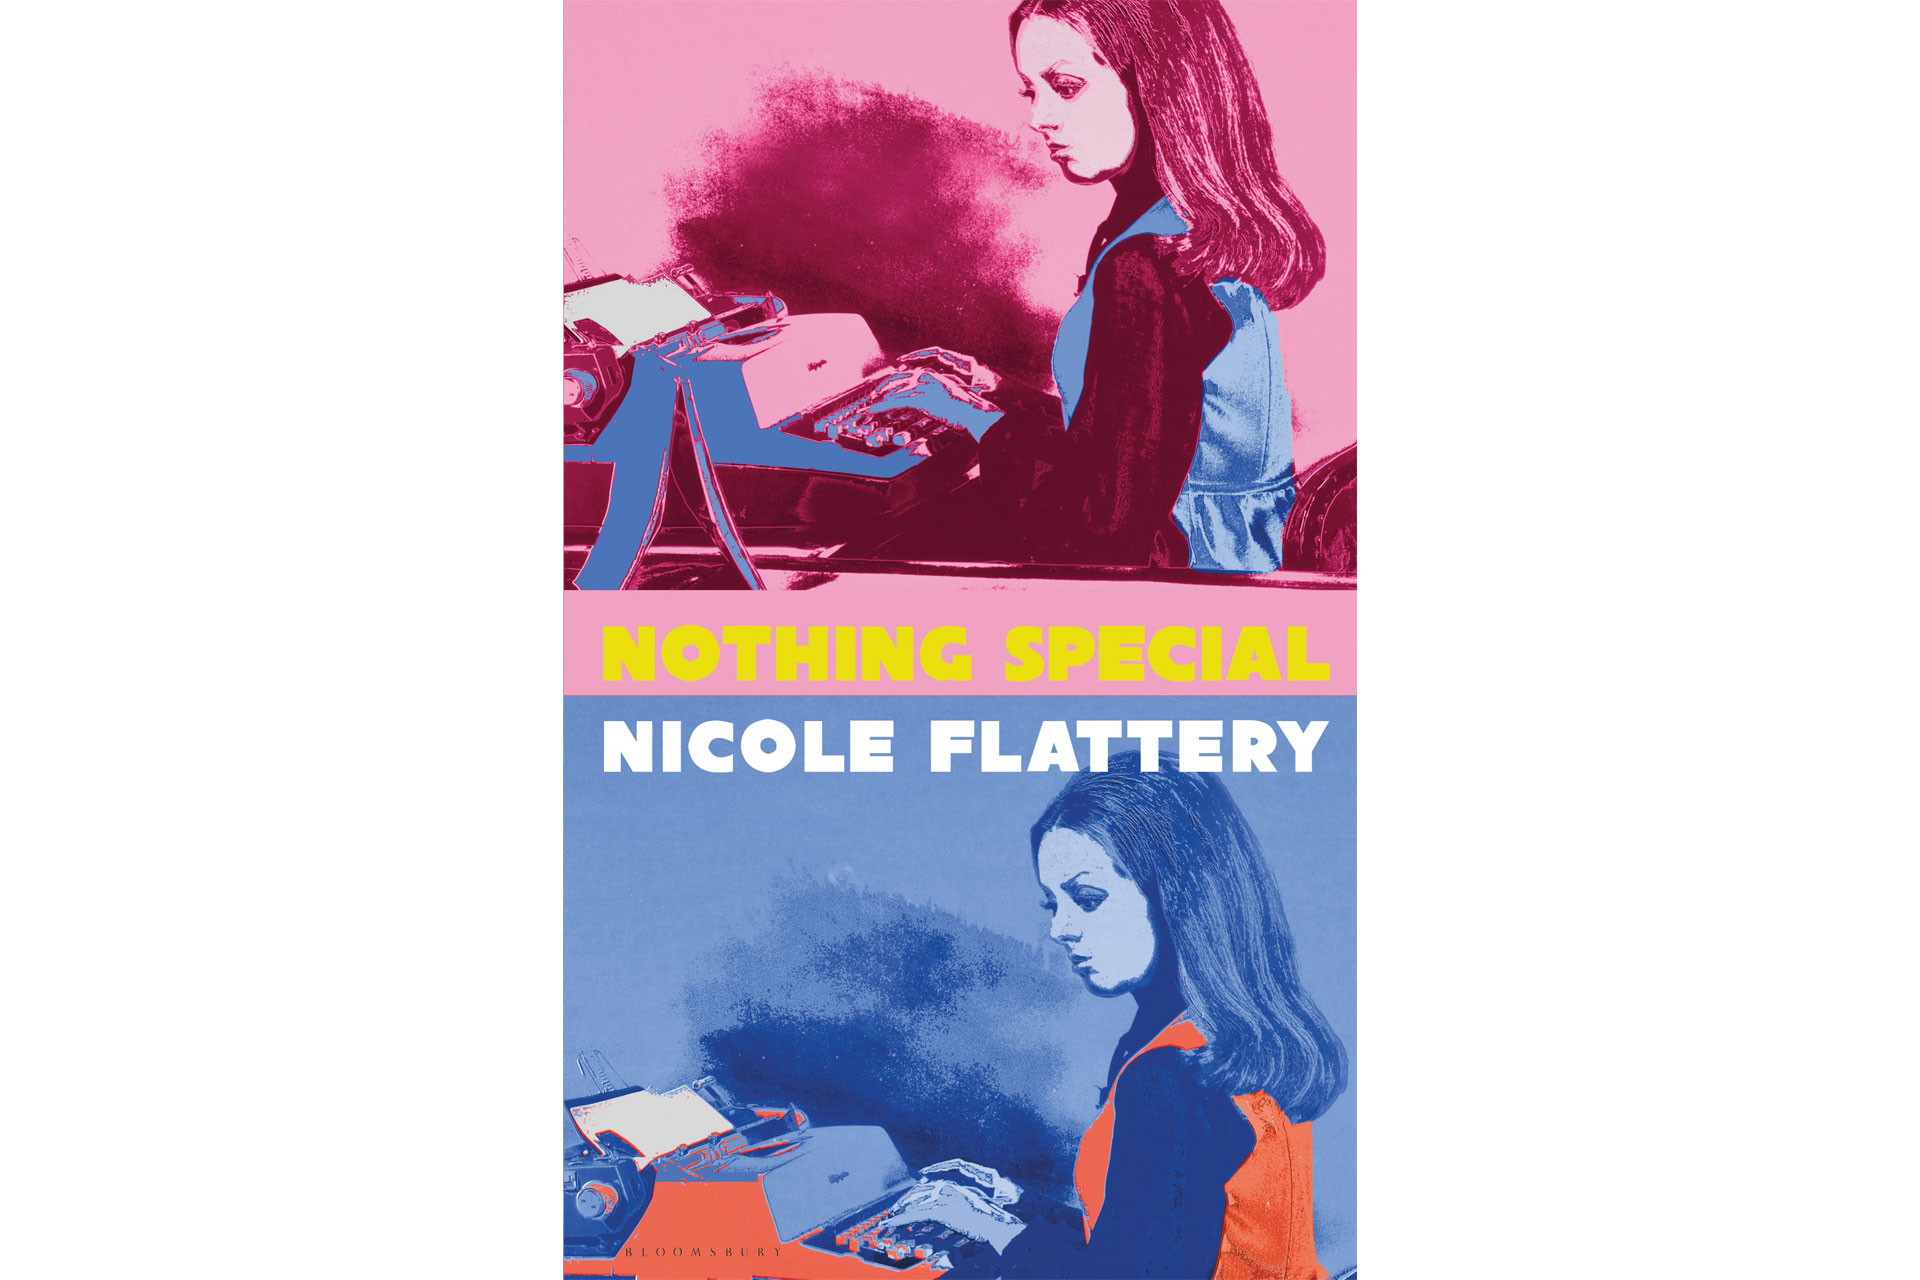 New book by author Nicole Flattery